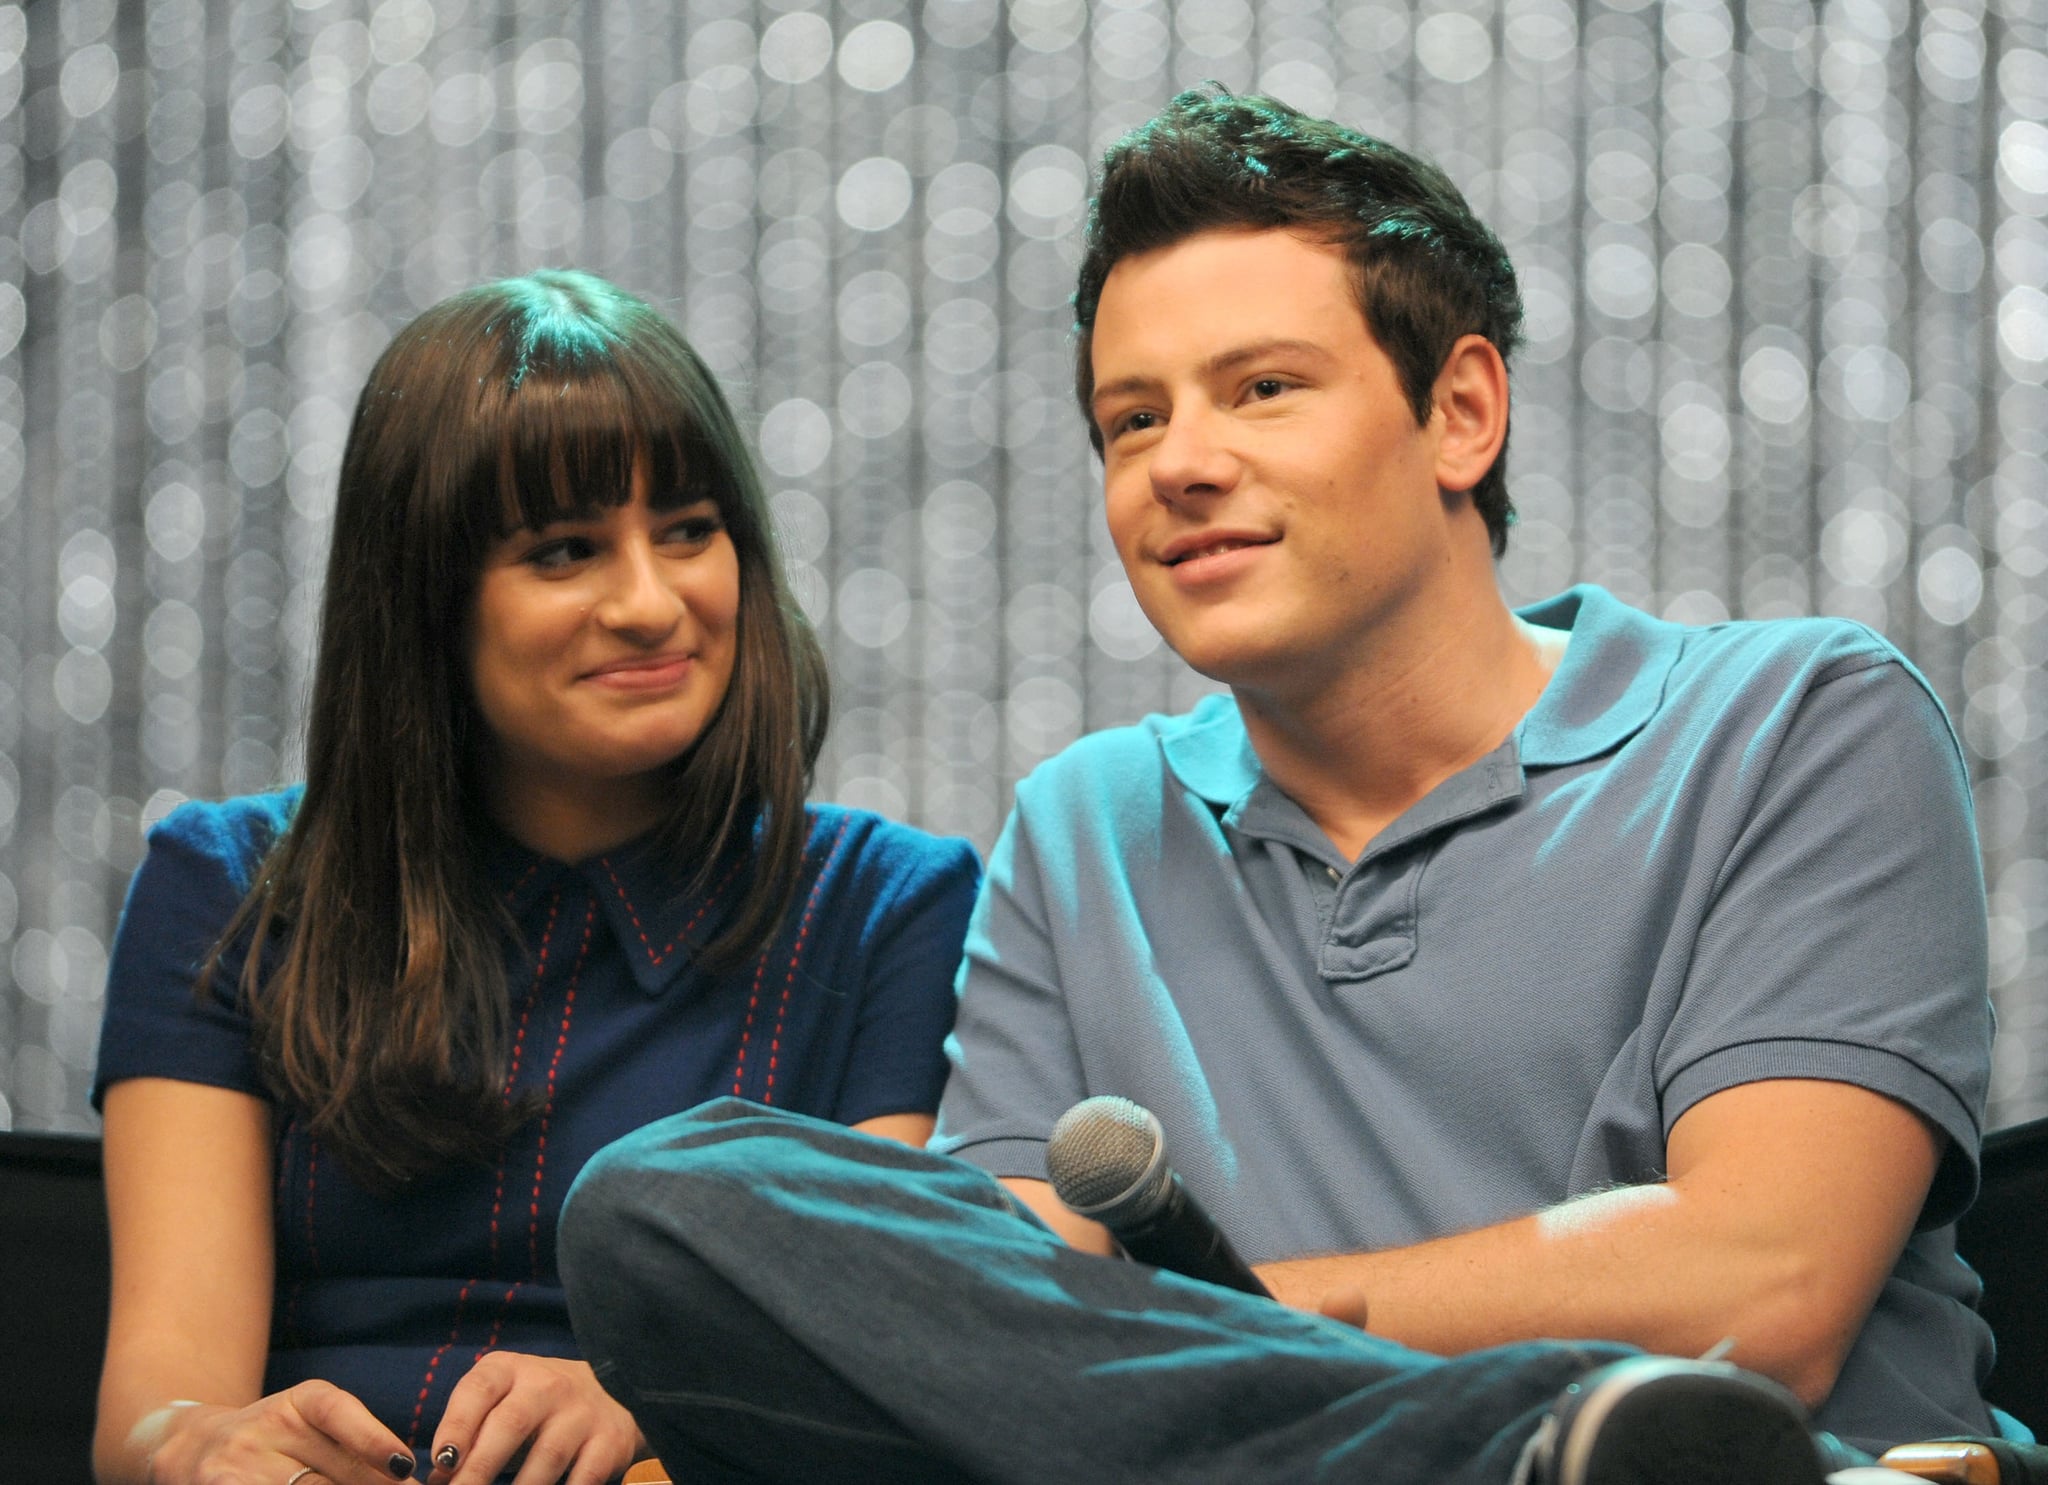 HOLLYWOOD, CA - OCTOBER 26:  Actors Lea Michele and Cory Monteith onstage during the Q & A following the 300th musical performance on